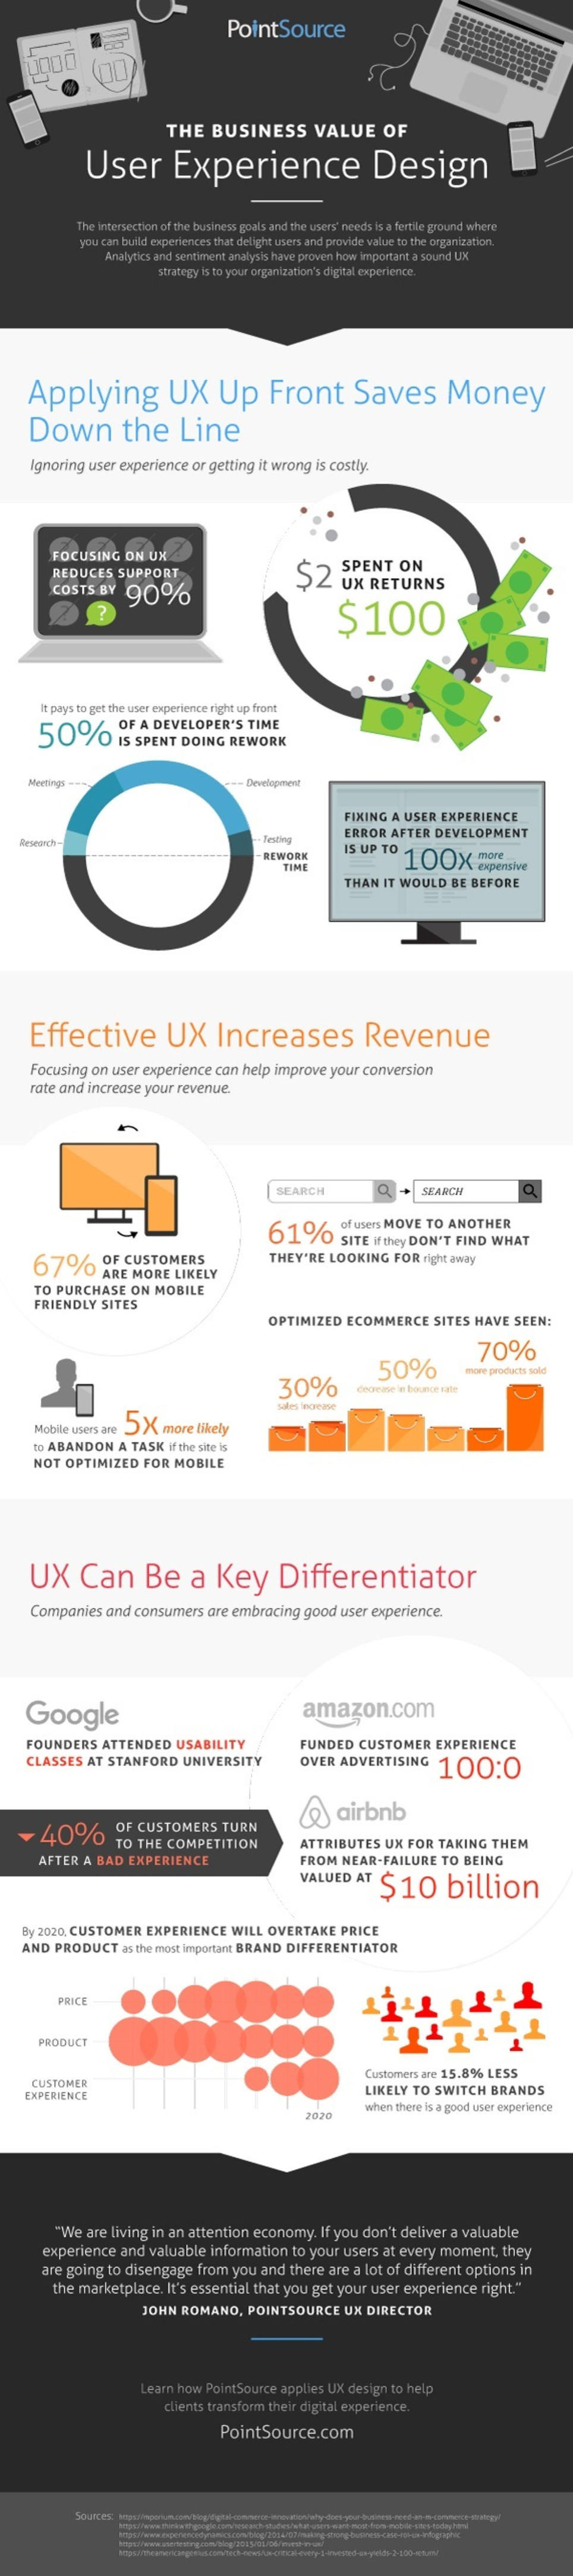 The Business Value of User Experience Design #Infographic | WebsiteDesign | Scoop.it